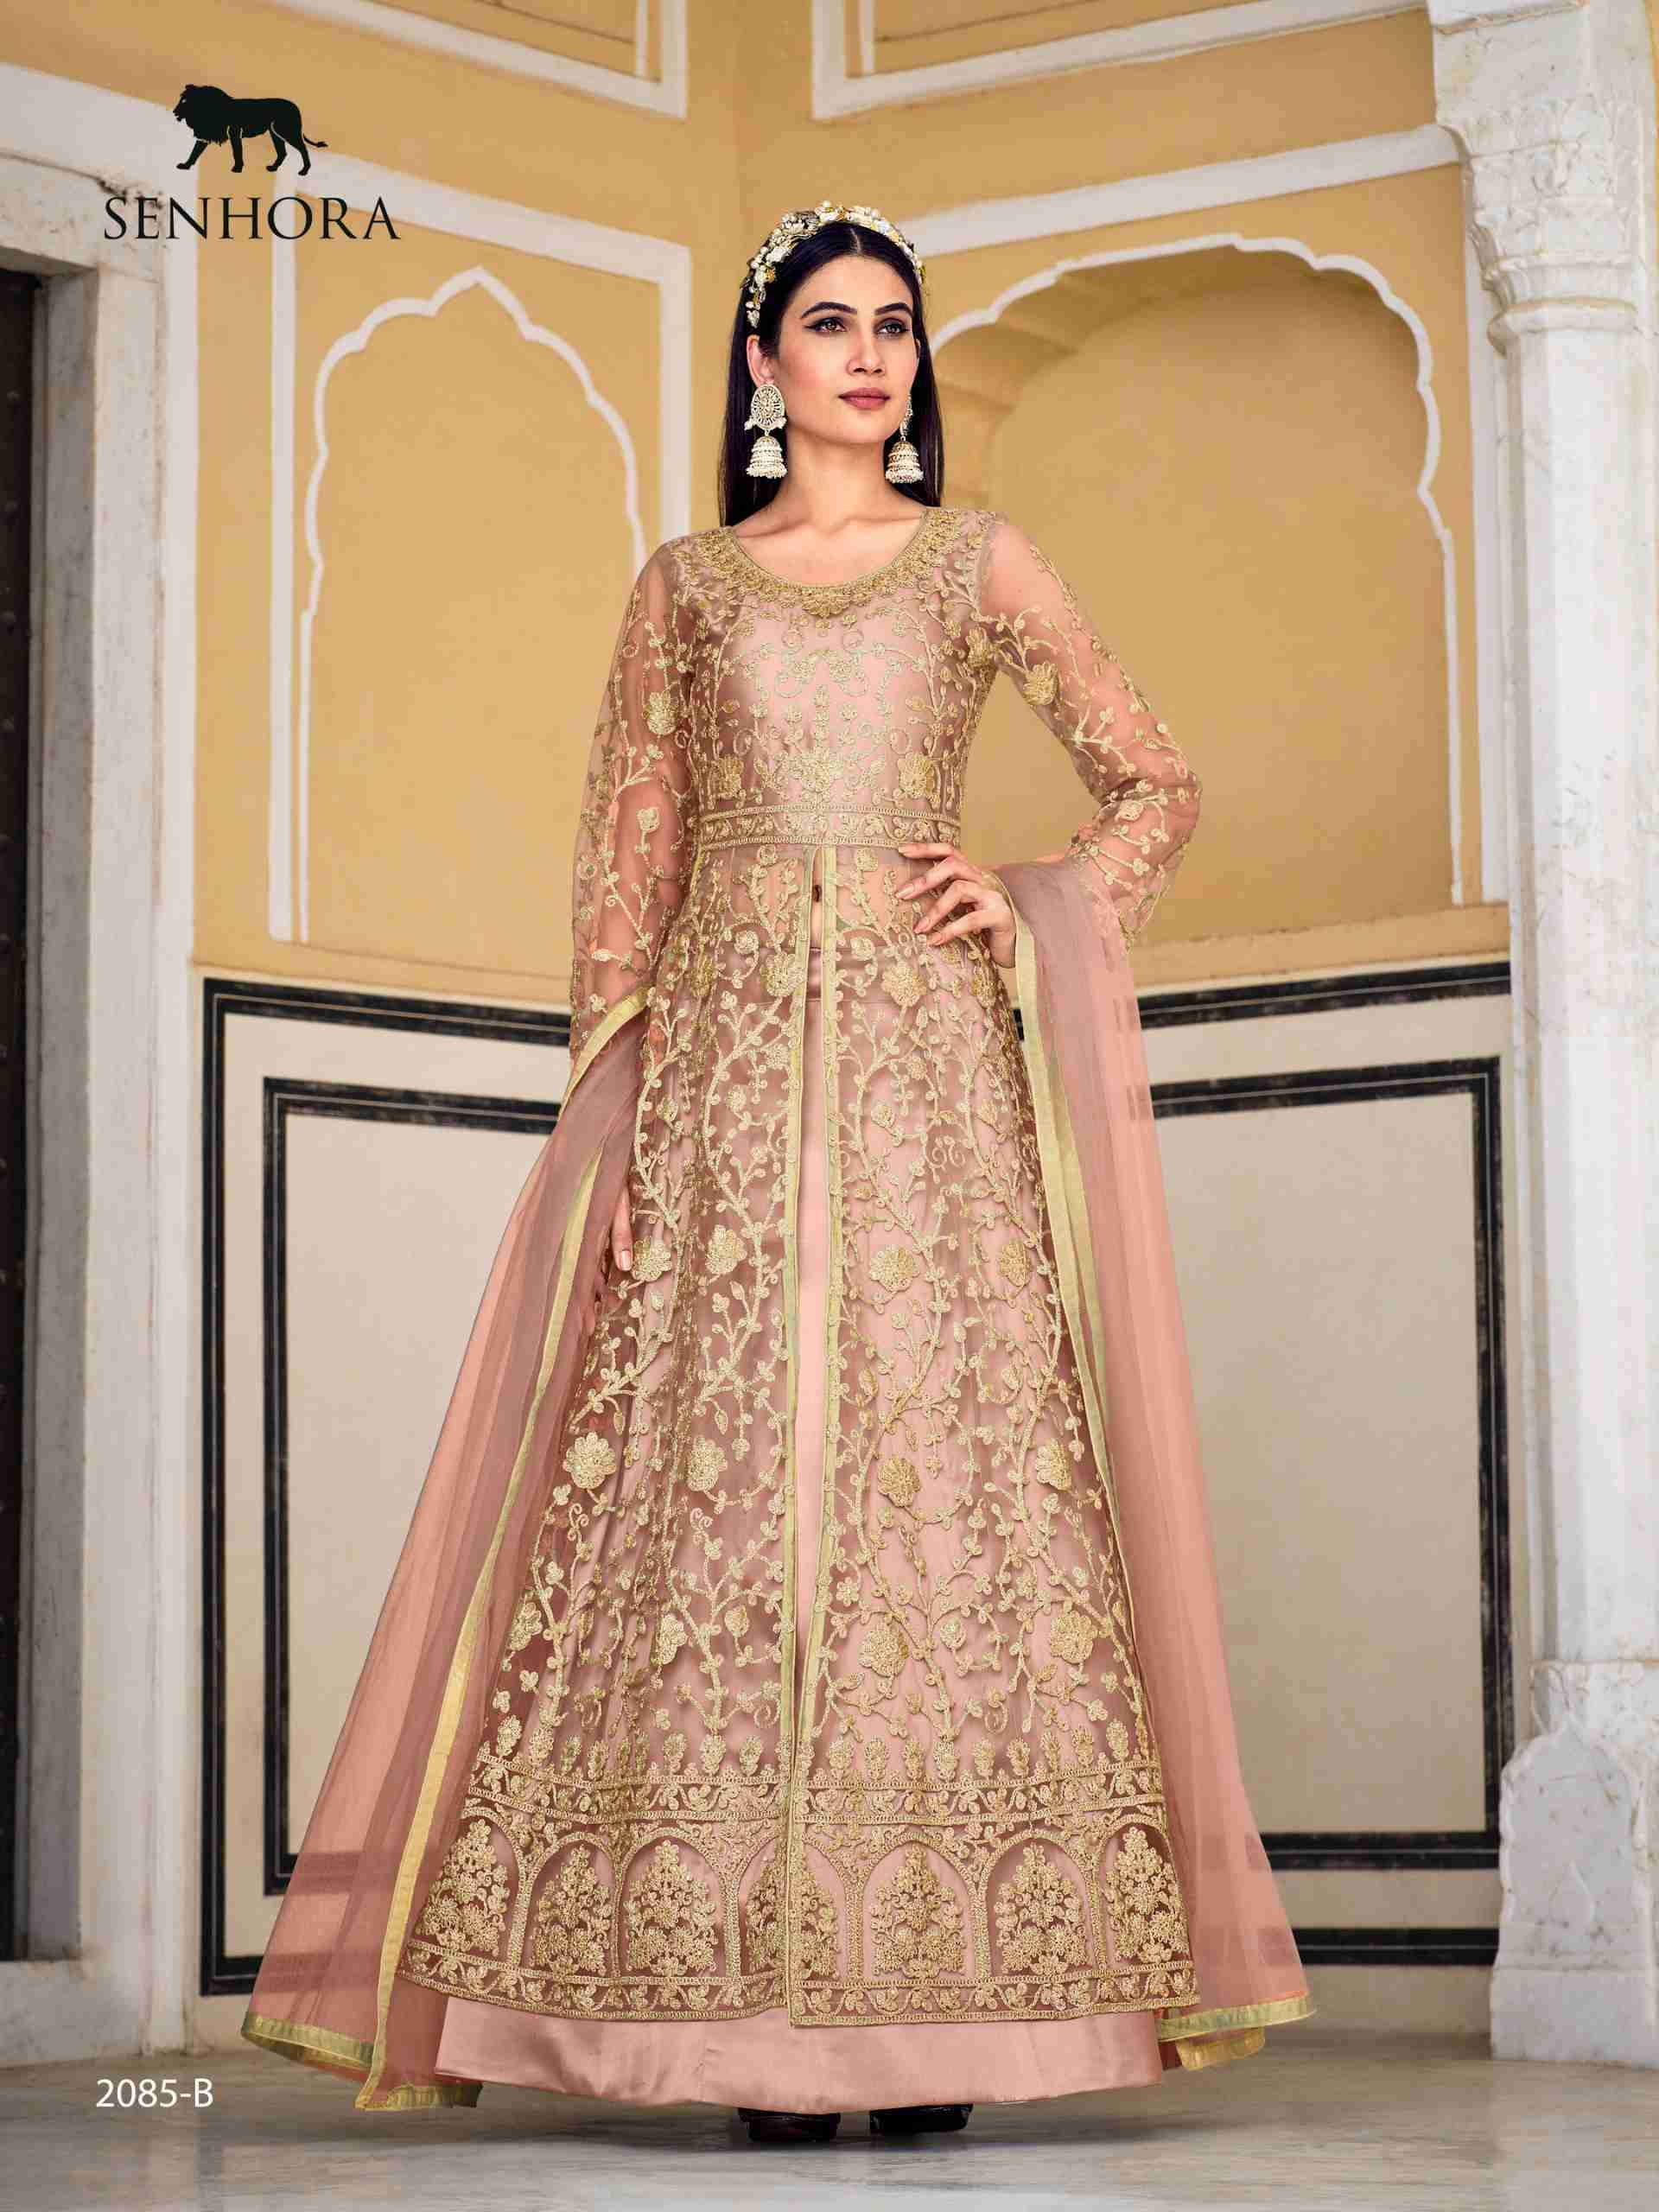 Where To Buy Wedding Gowns In Bangalore | LBB